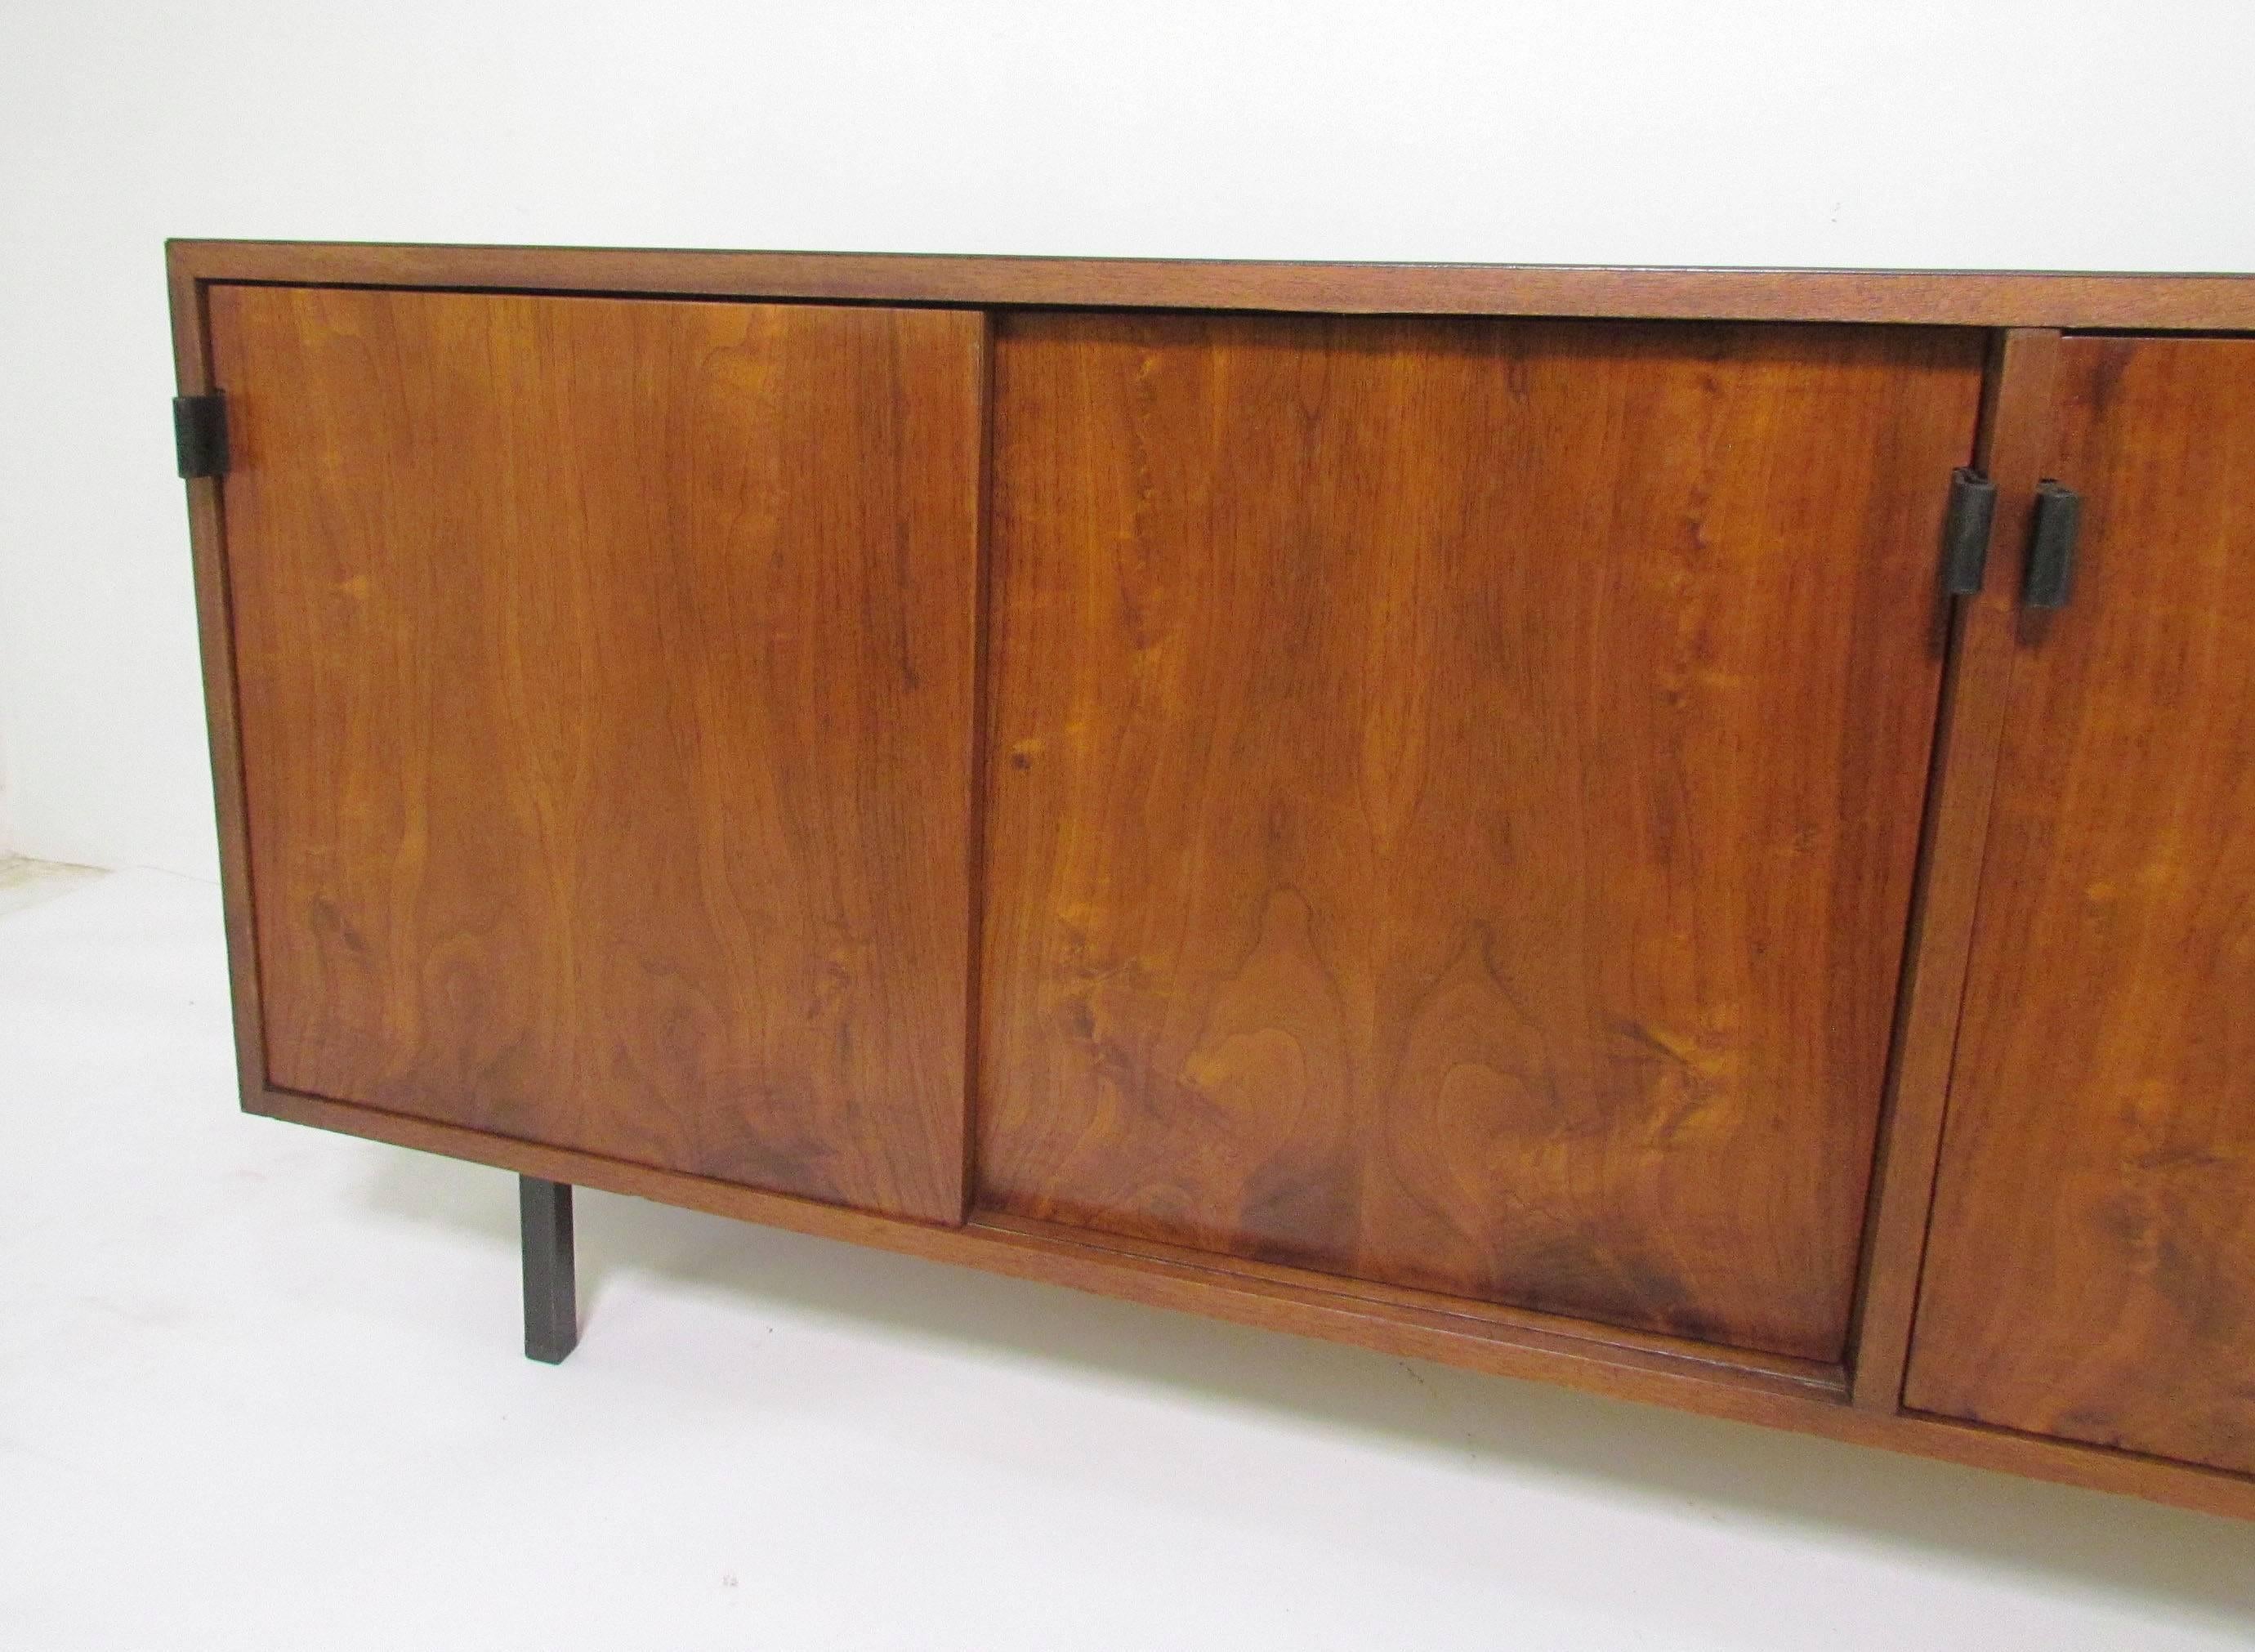 Florence Knoll credenza in walnut and mahogany with leather pulls, circa 1960s. Multiple adjustable shelves allow for internal configuration to suit ones needs.